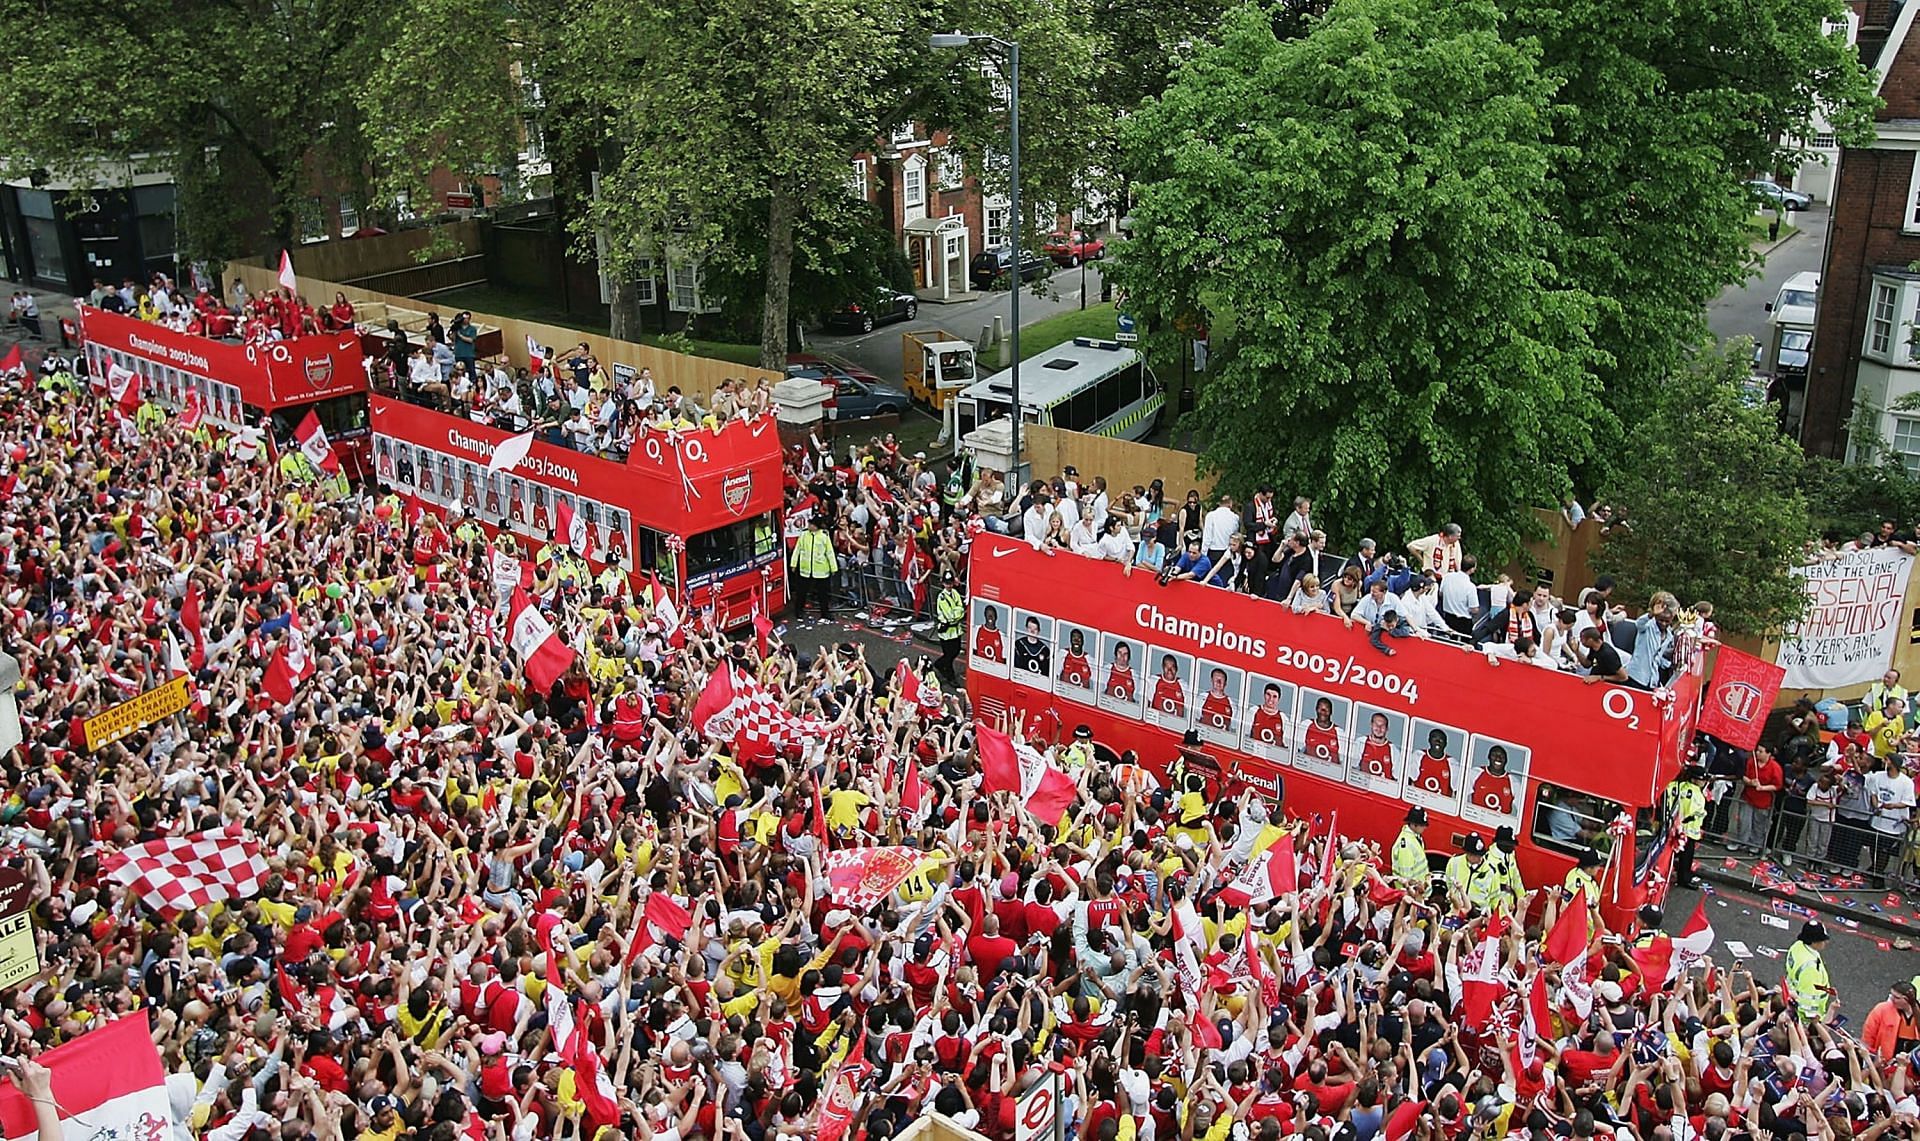 Arsenal victory parade following their win in the 2003-04 Premier League